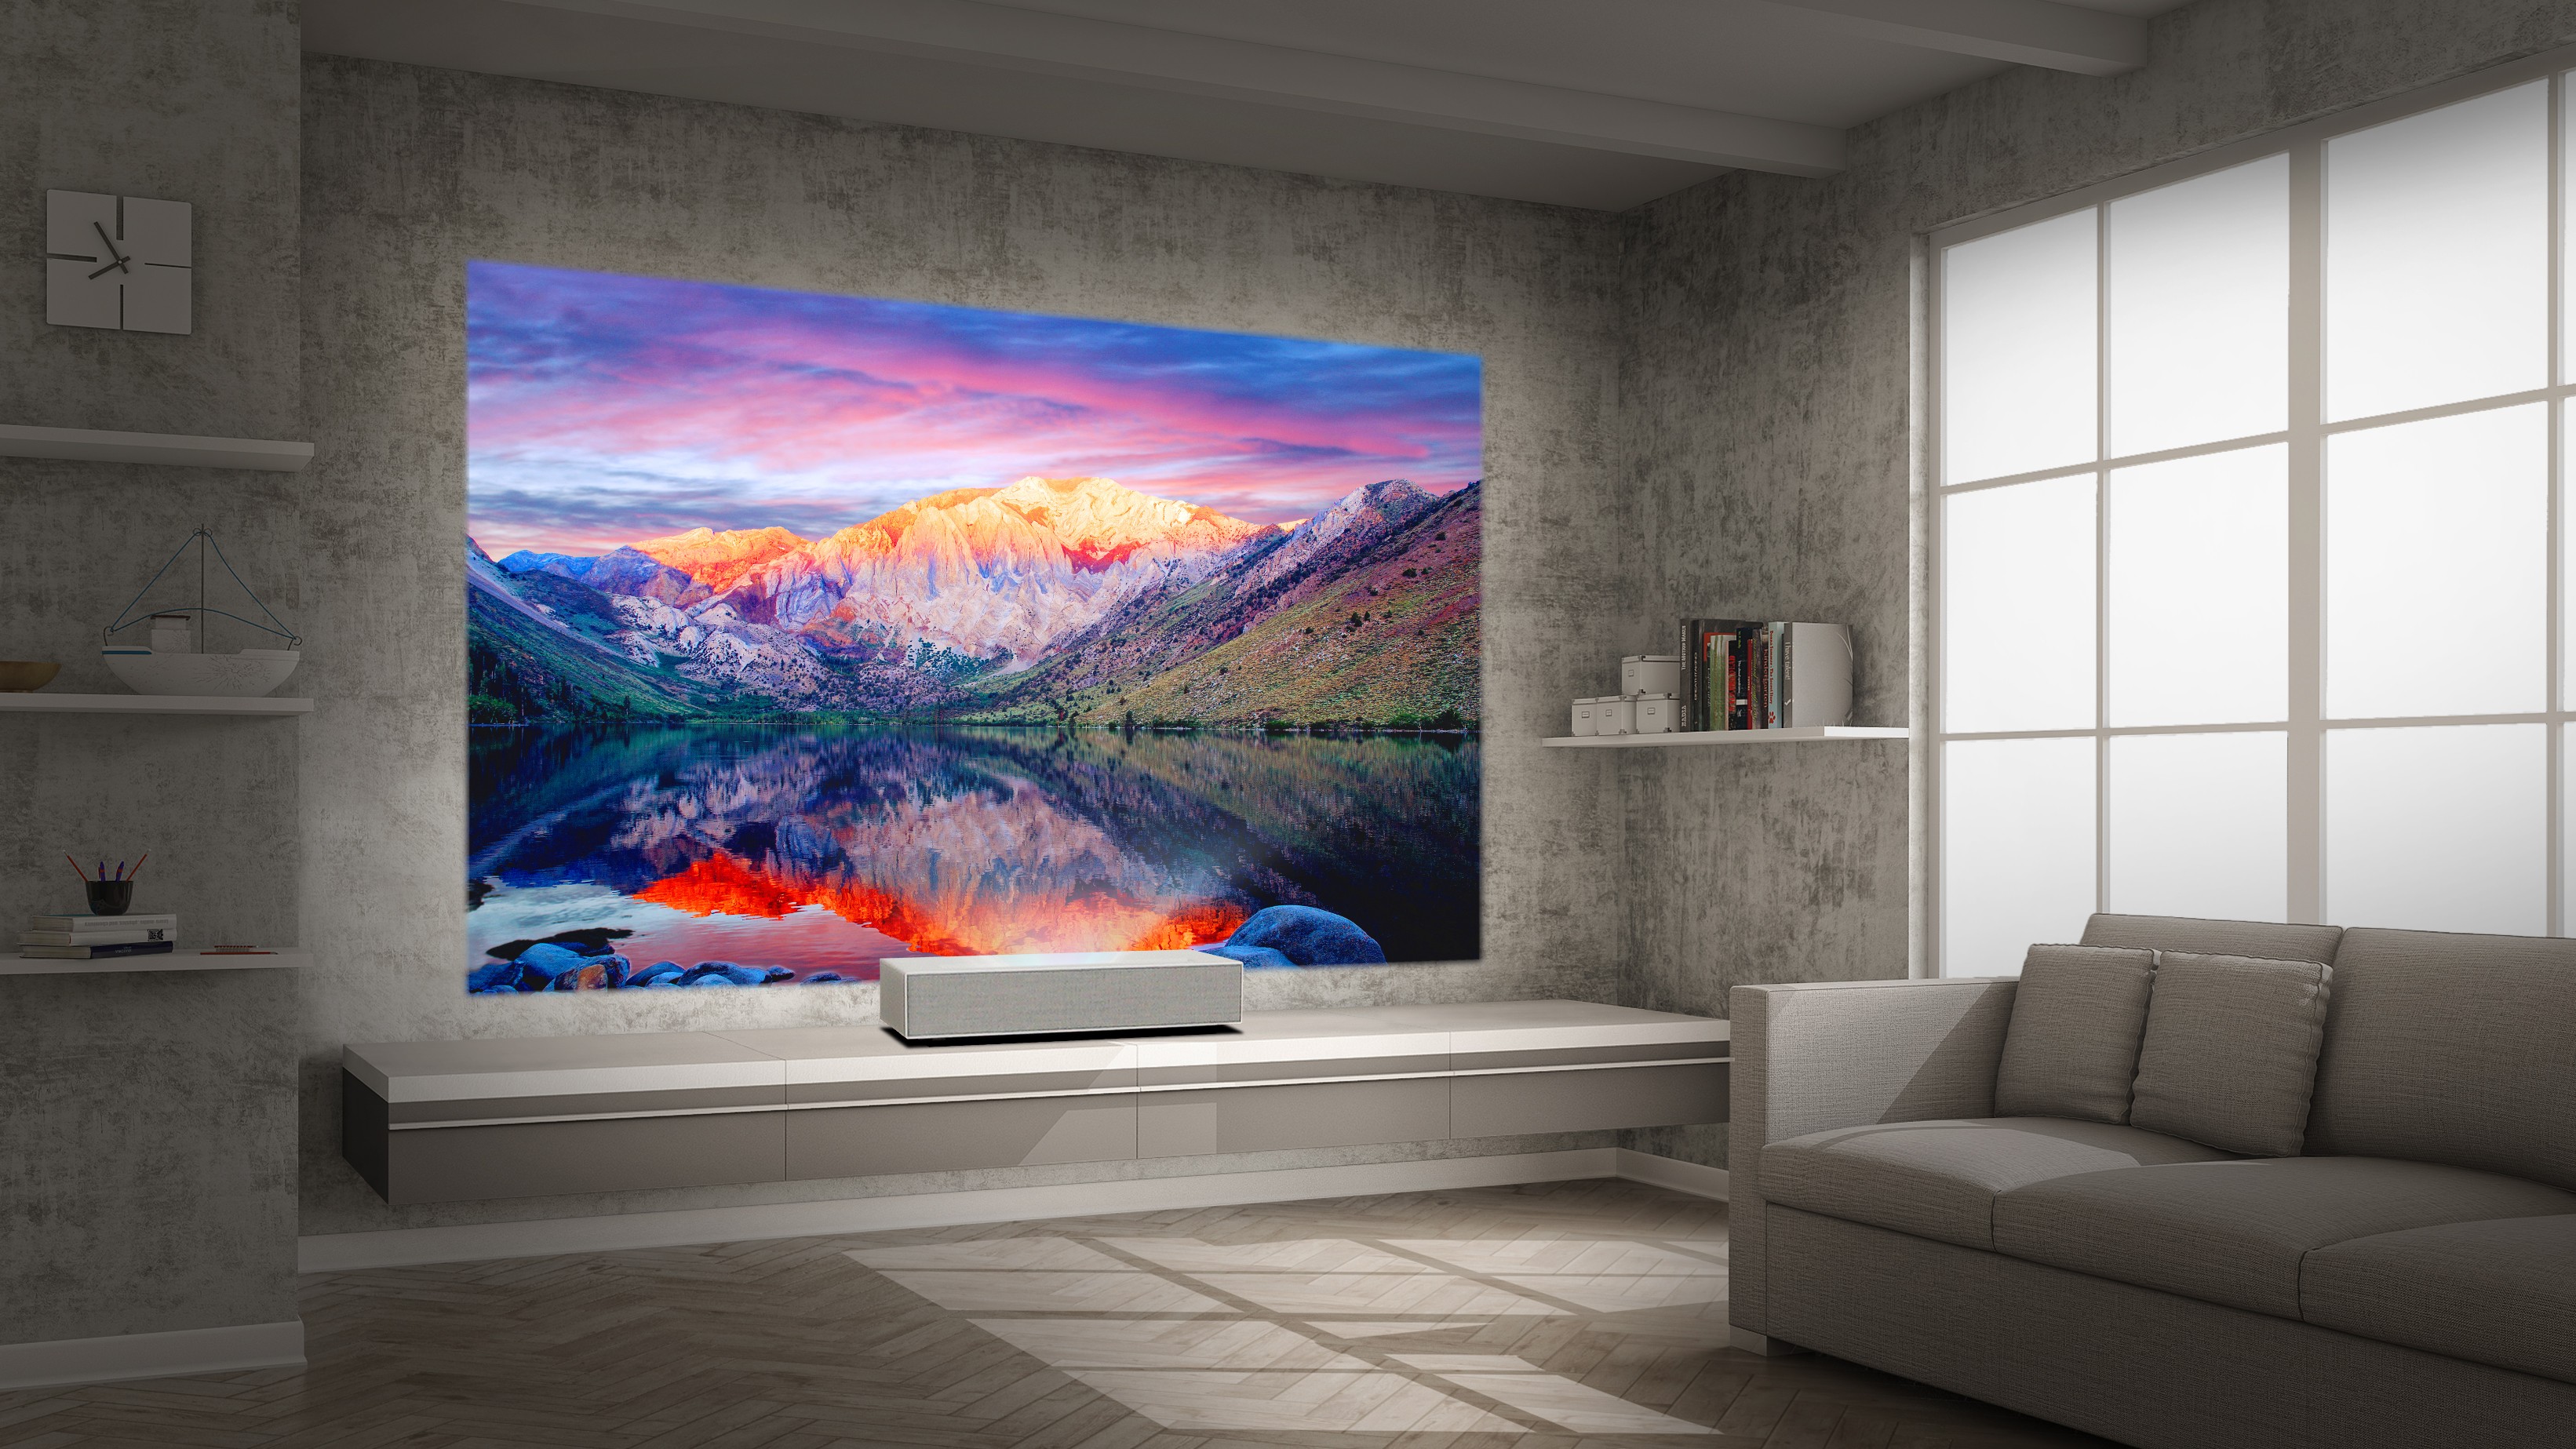 A view of LG CineBeam 4K UHD projector model HU85L producing incredible natural landscapes in a modern, low-lit living room